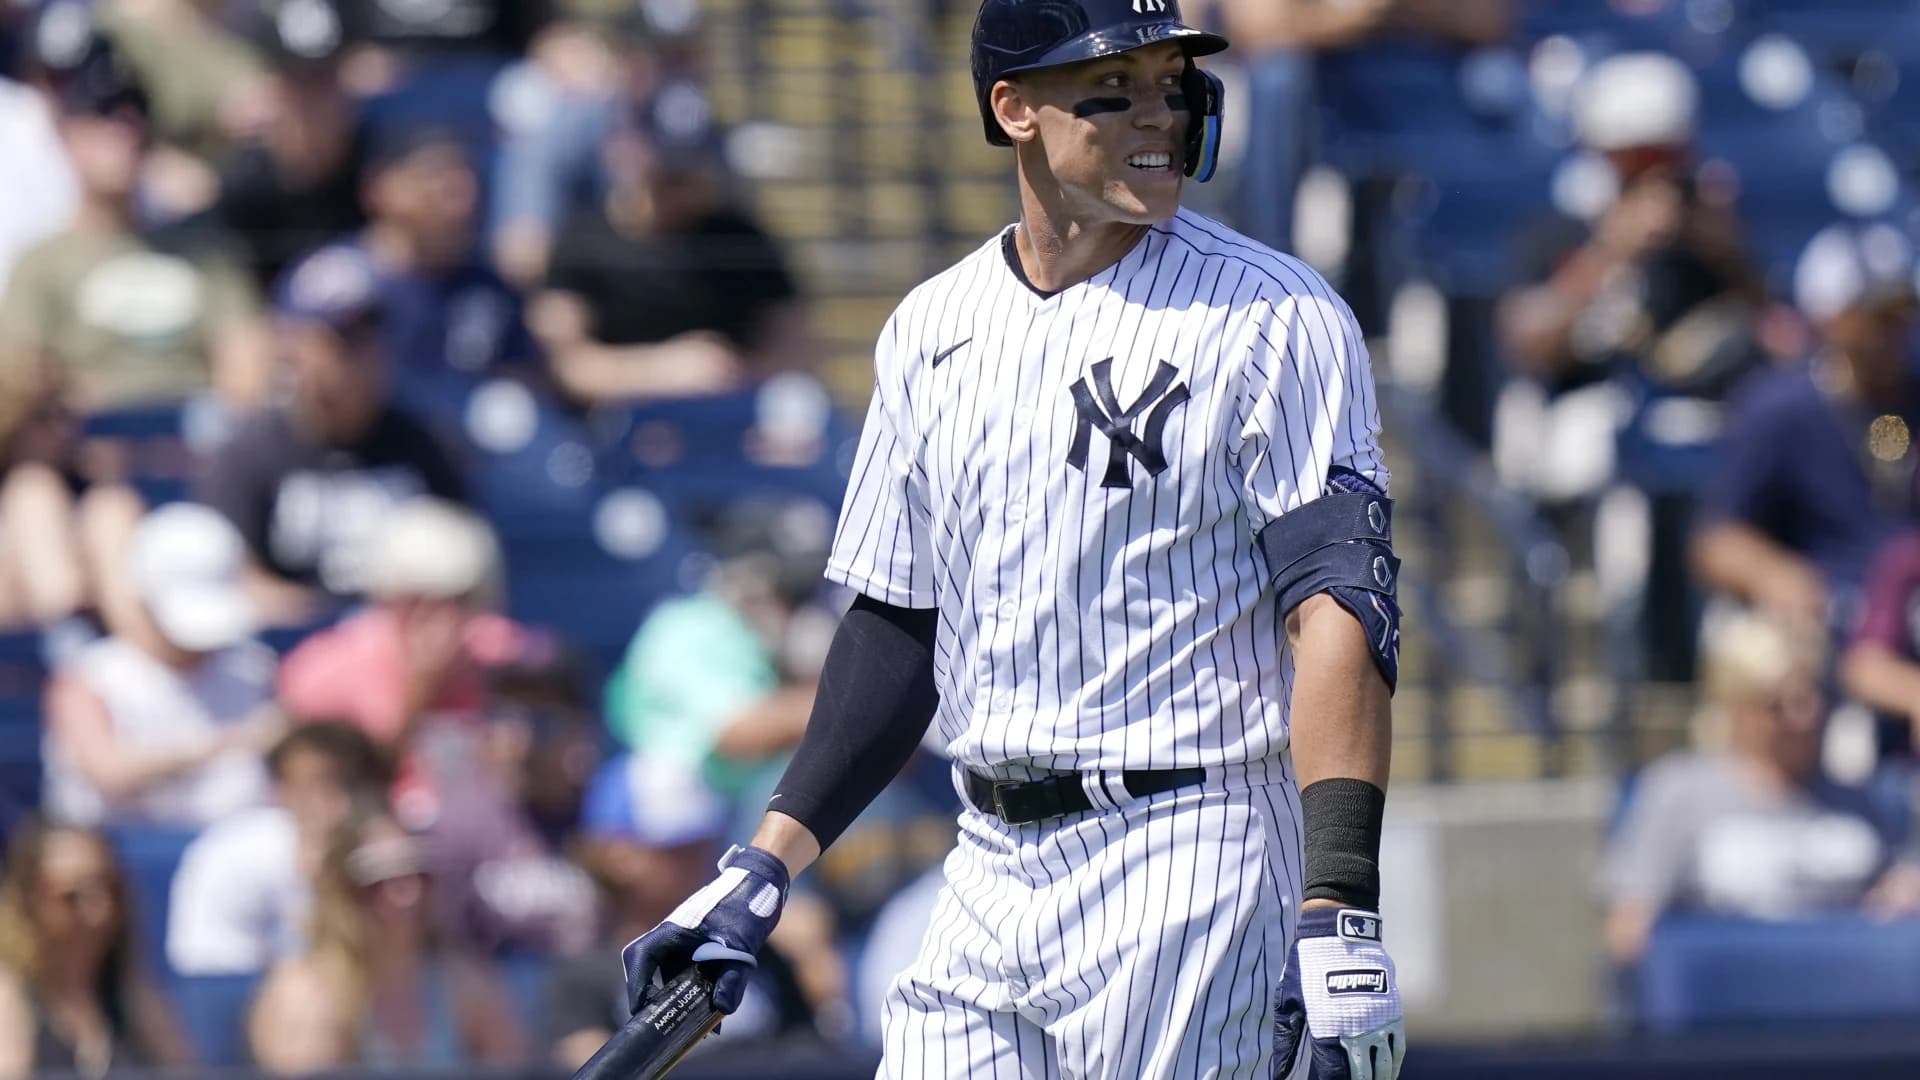 Yankees star Judge says talks ongoing about new contract